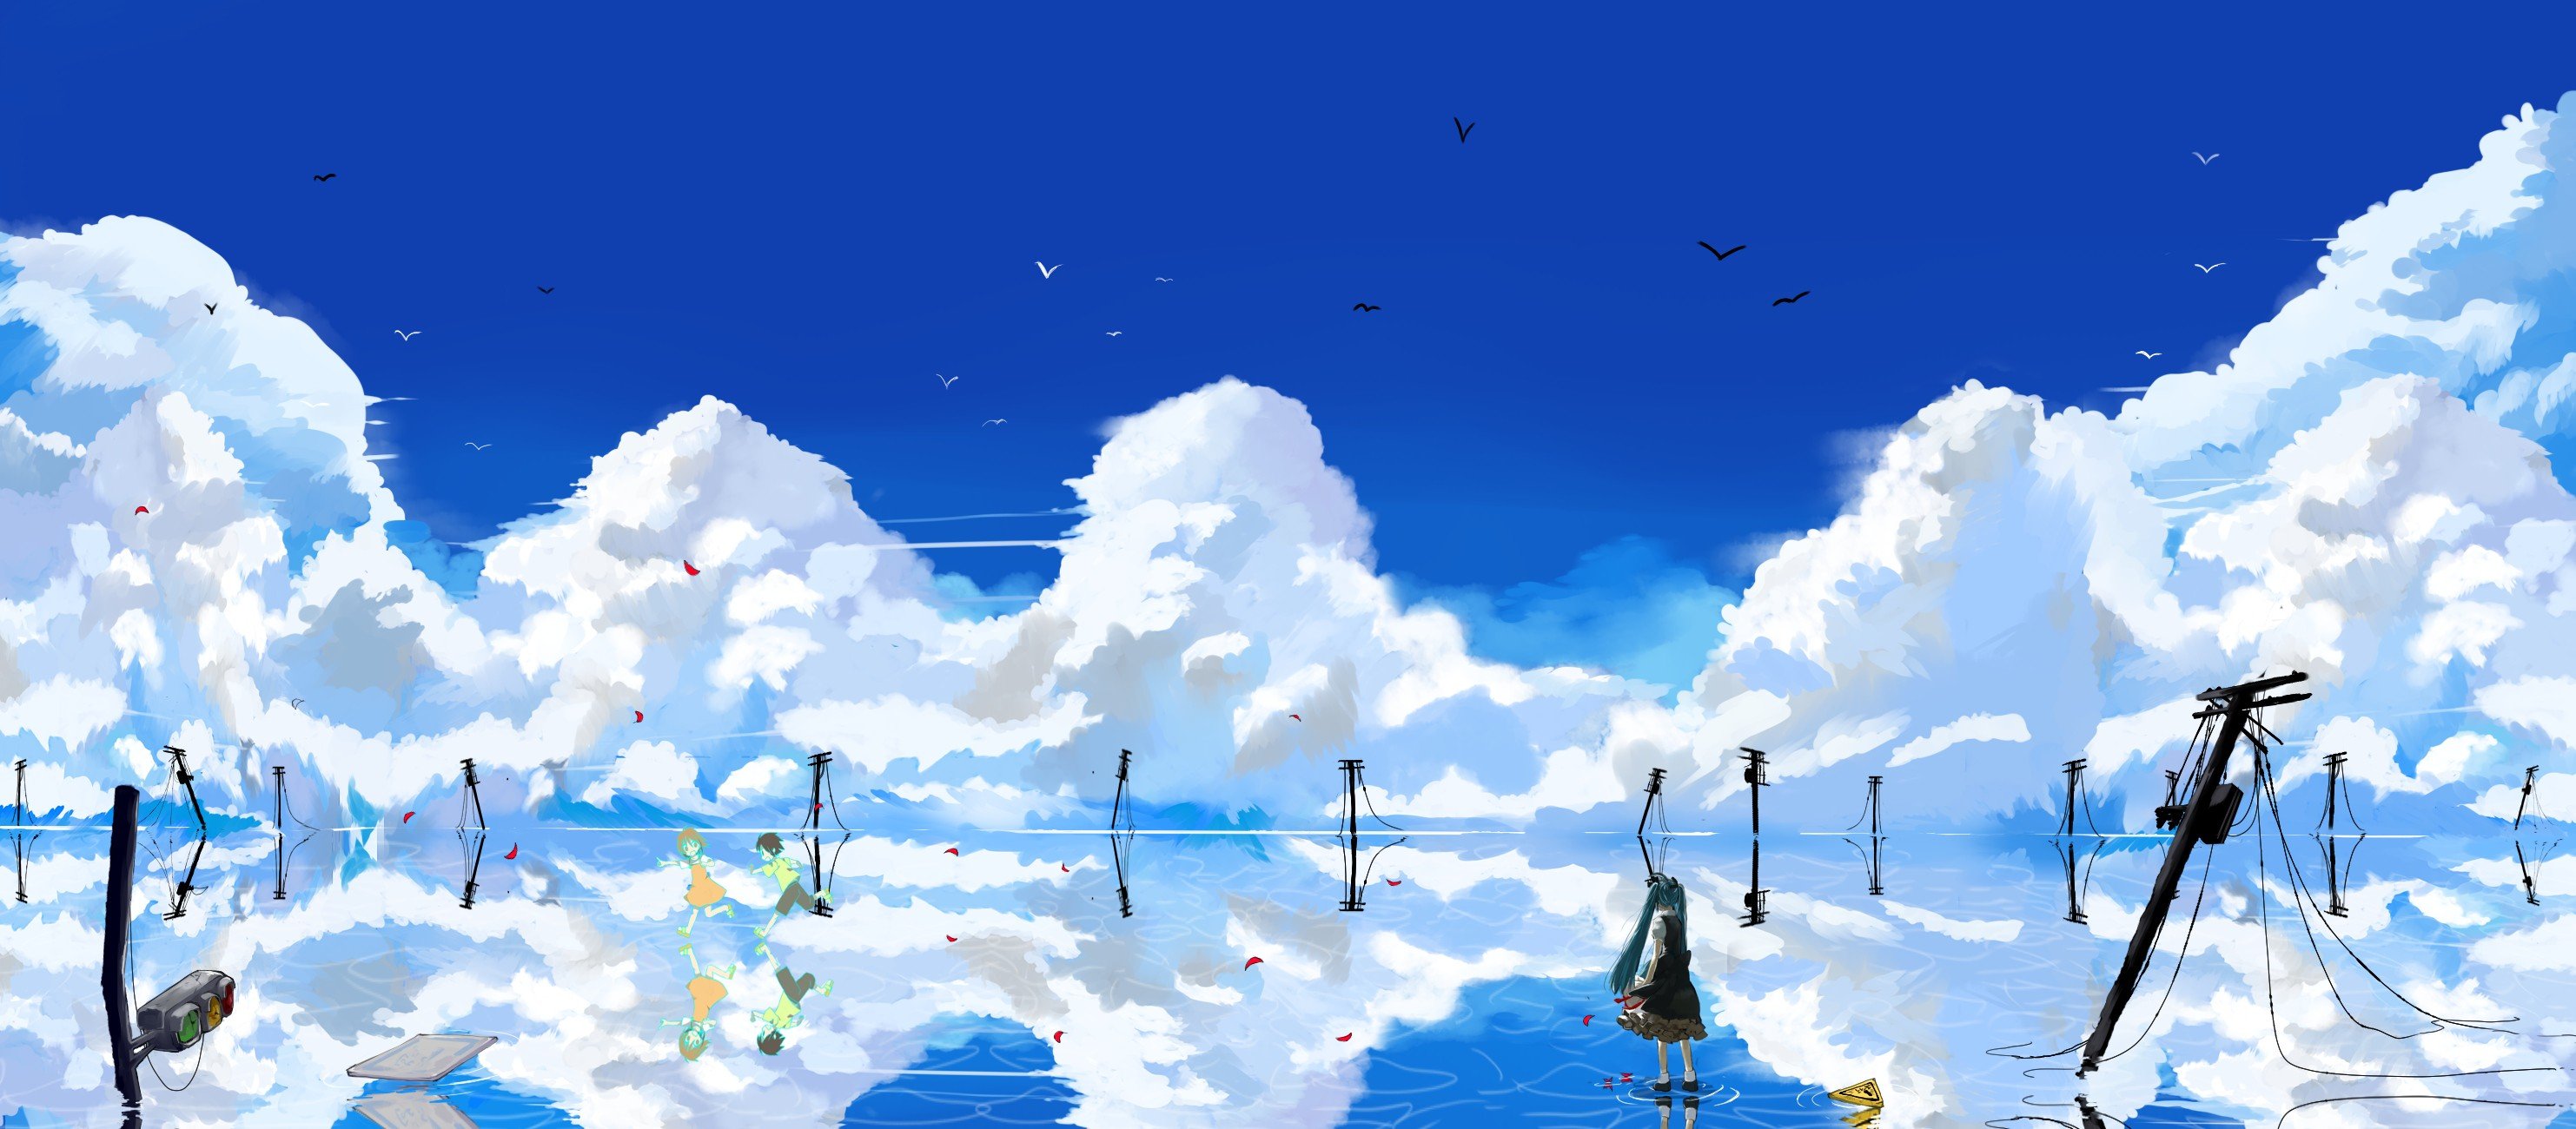 Water abstract blue clouds landscapes vocaloid hatsune 2965x1300